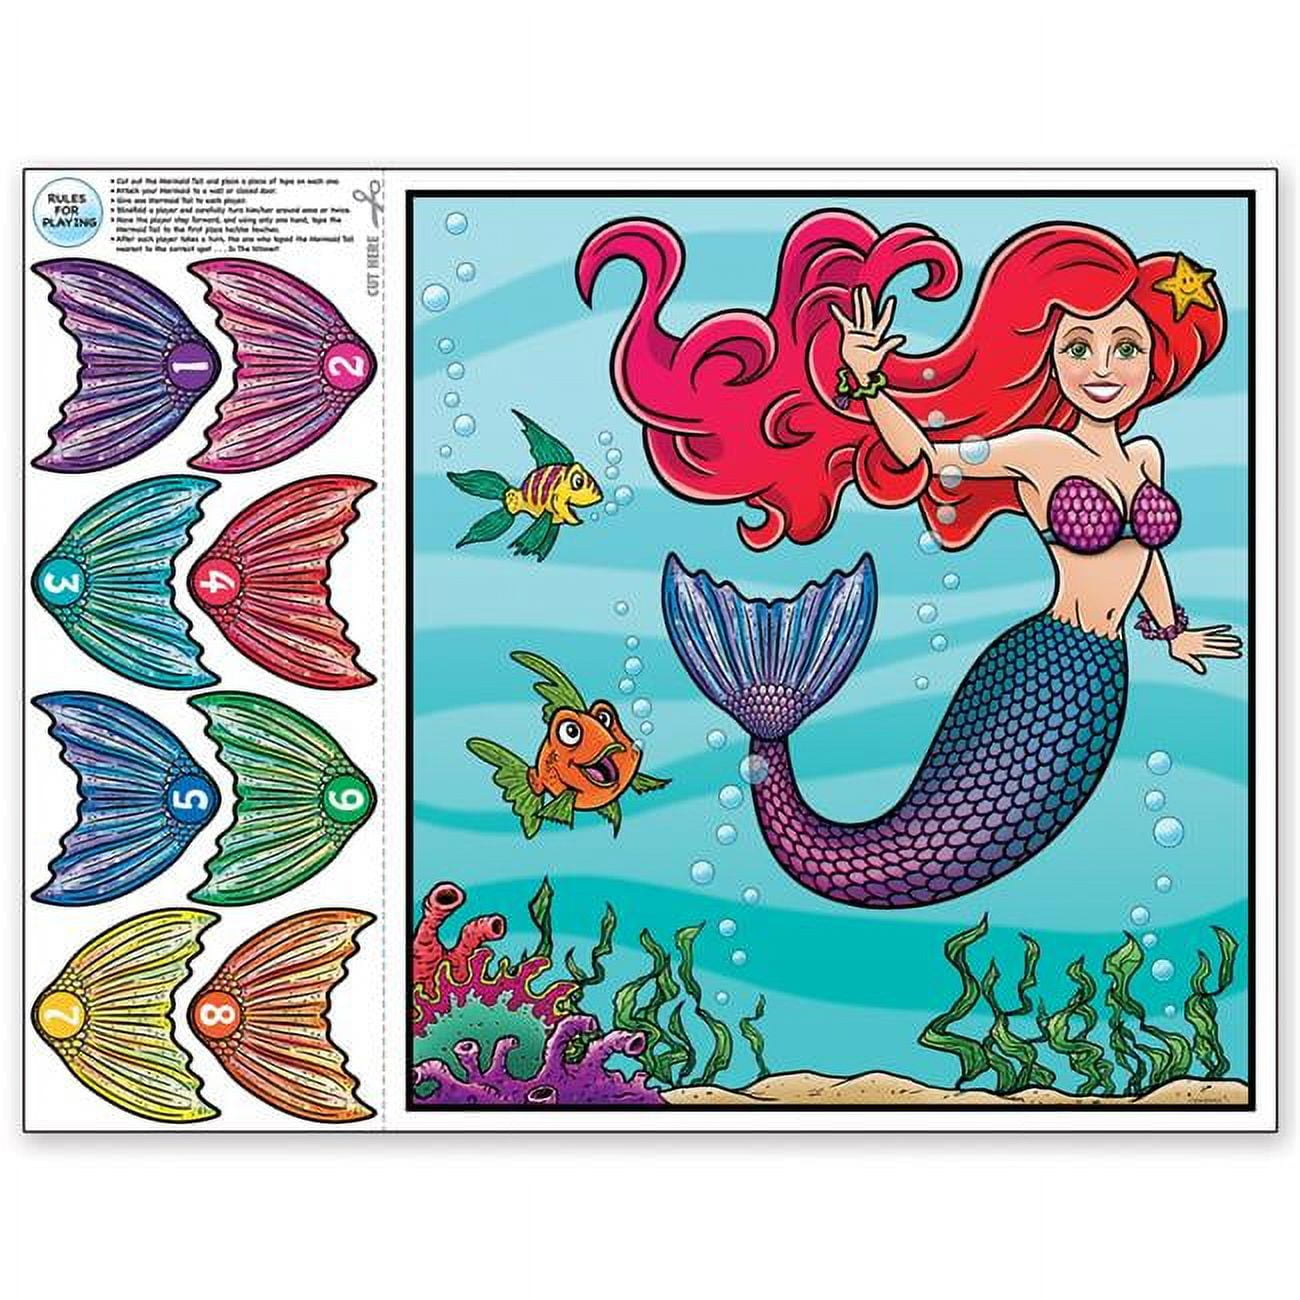 Picture of Beistle 60664 19 x 17.5 in. Pin the Tail On the Mermaid Game - Pack of 24